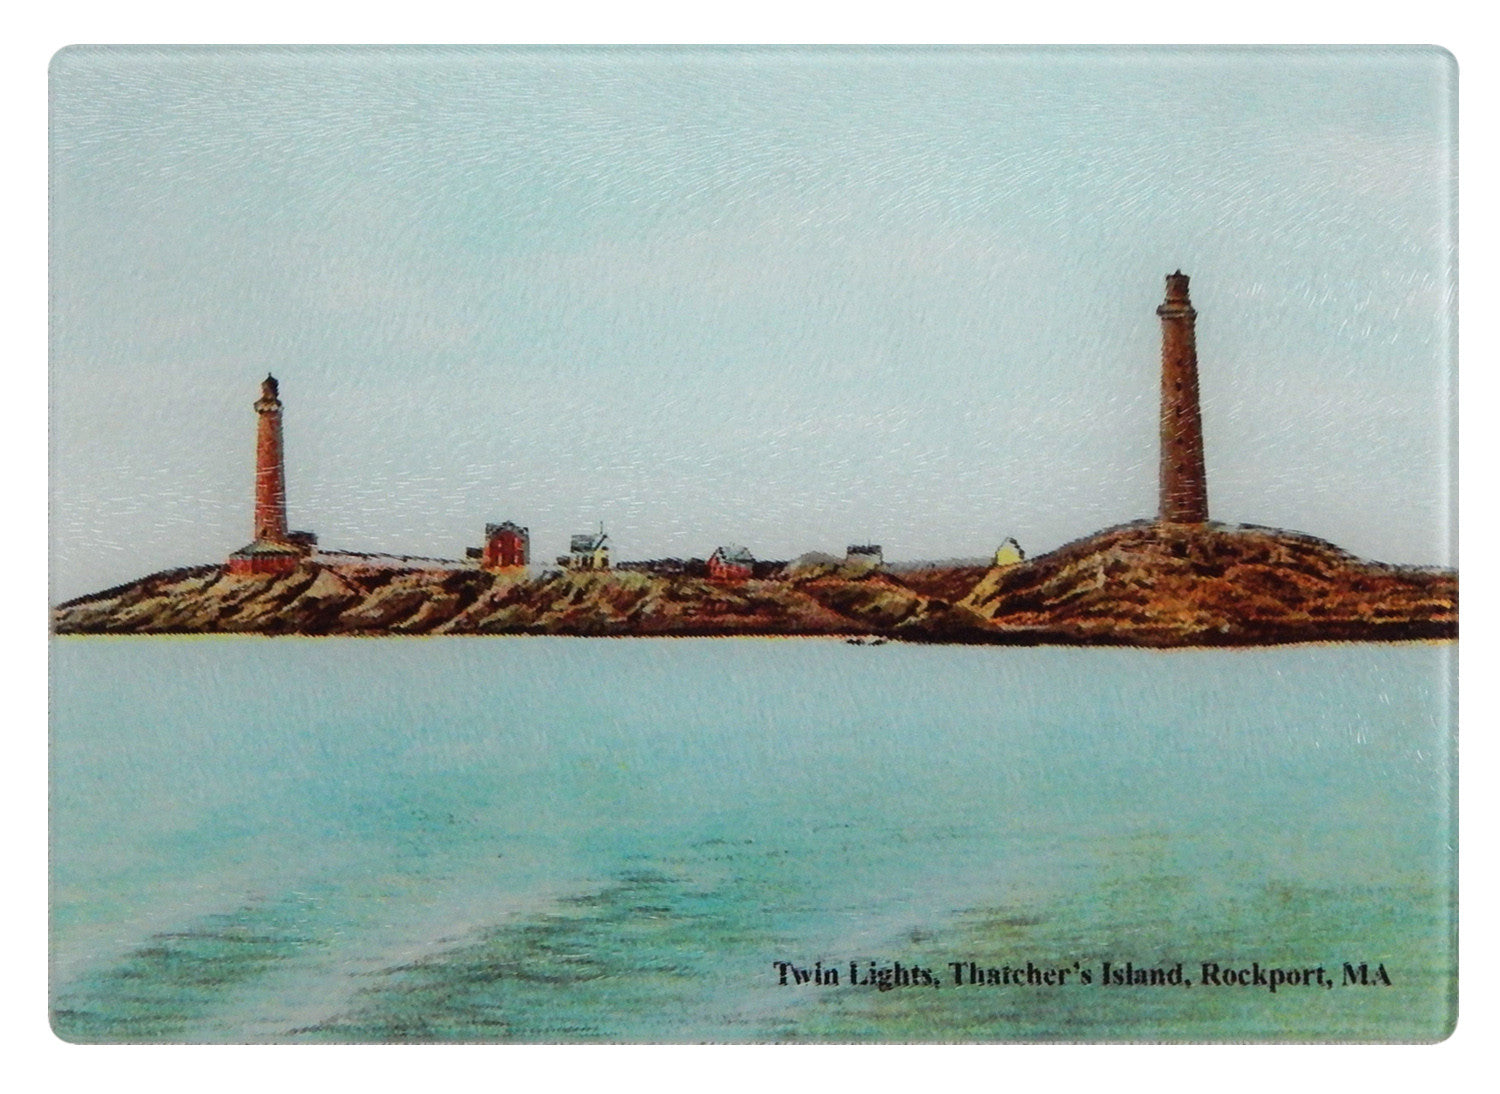 Rockport - Twin Lights, Thatchers Island Cutting Board - That Fabled Shore Home Decor